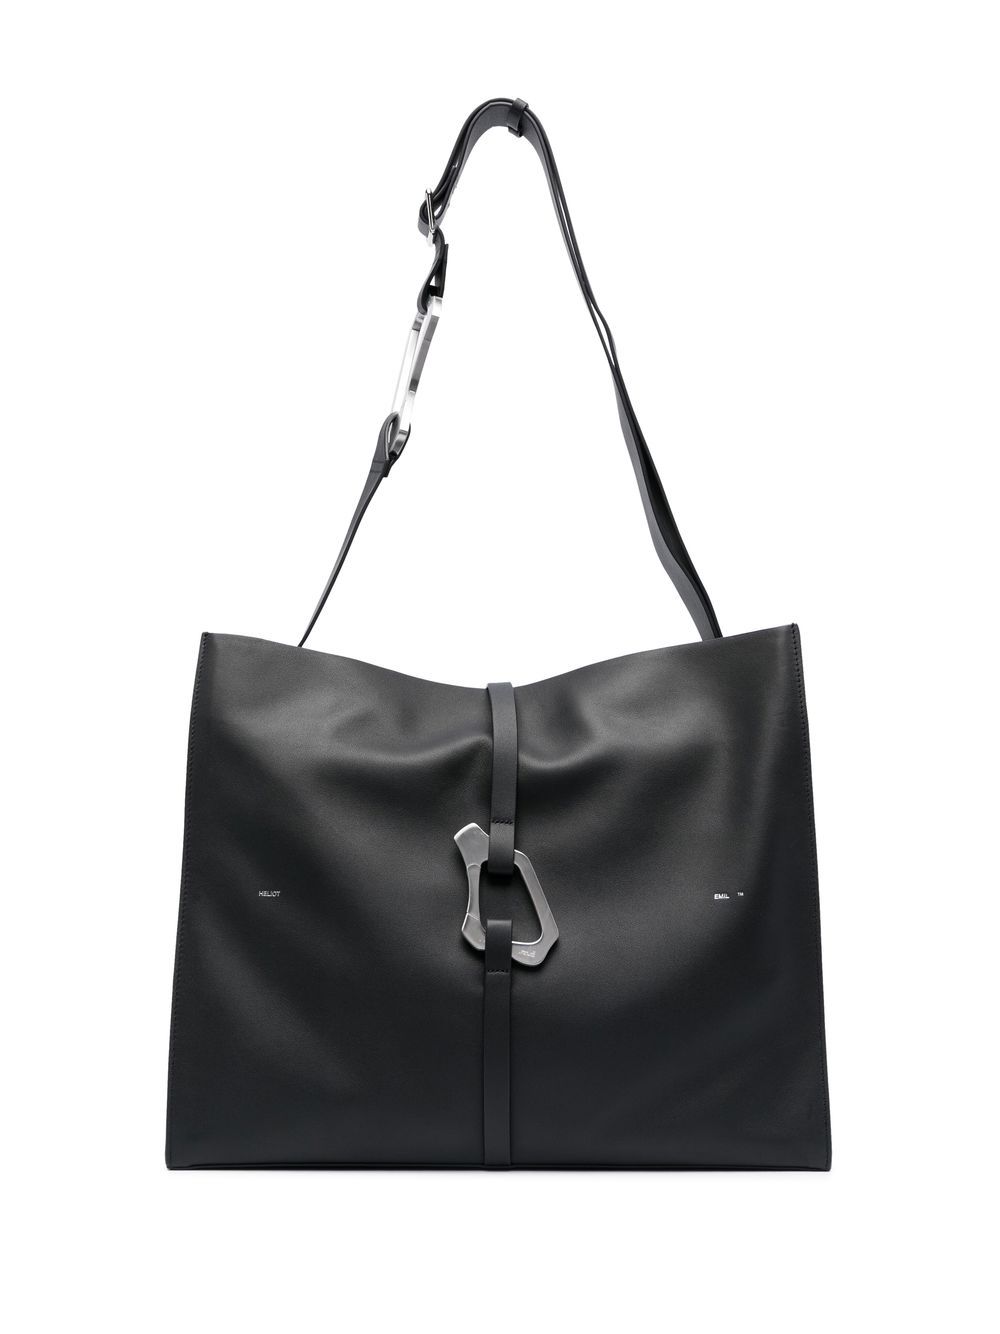 HELIOT EMIL LOGO-DETAIL LEATHER TOTE BAG